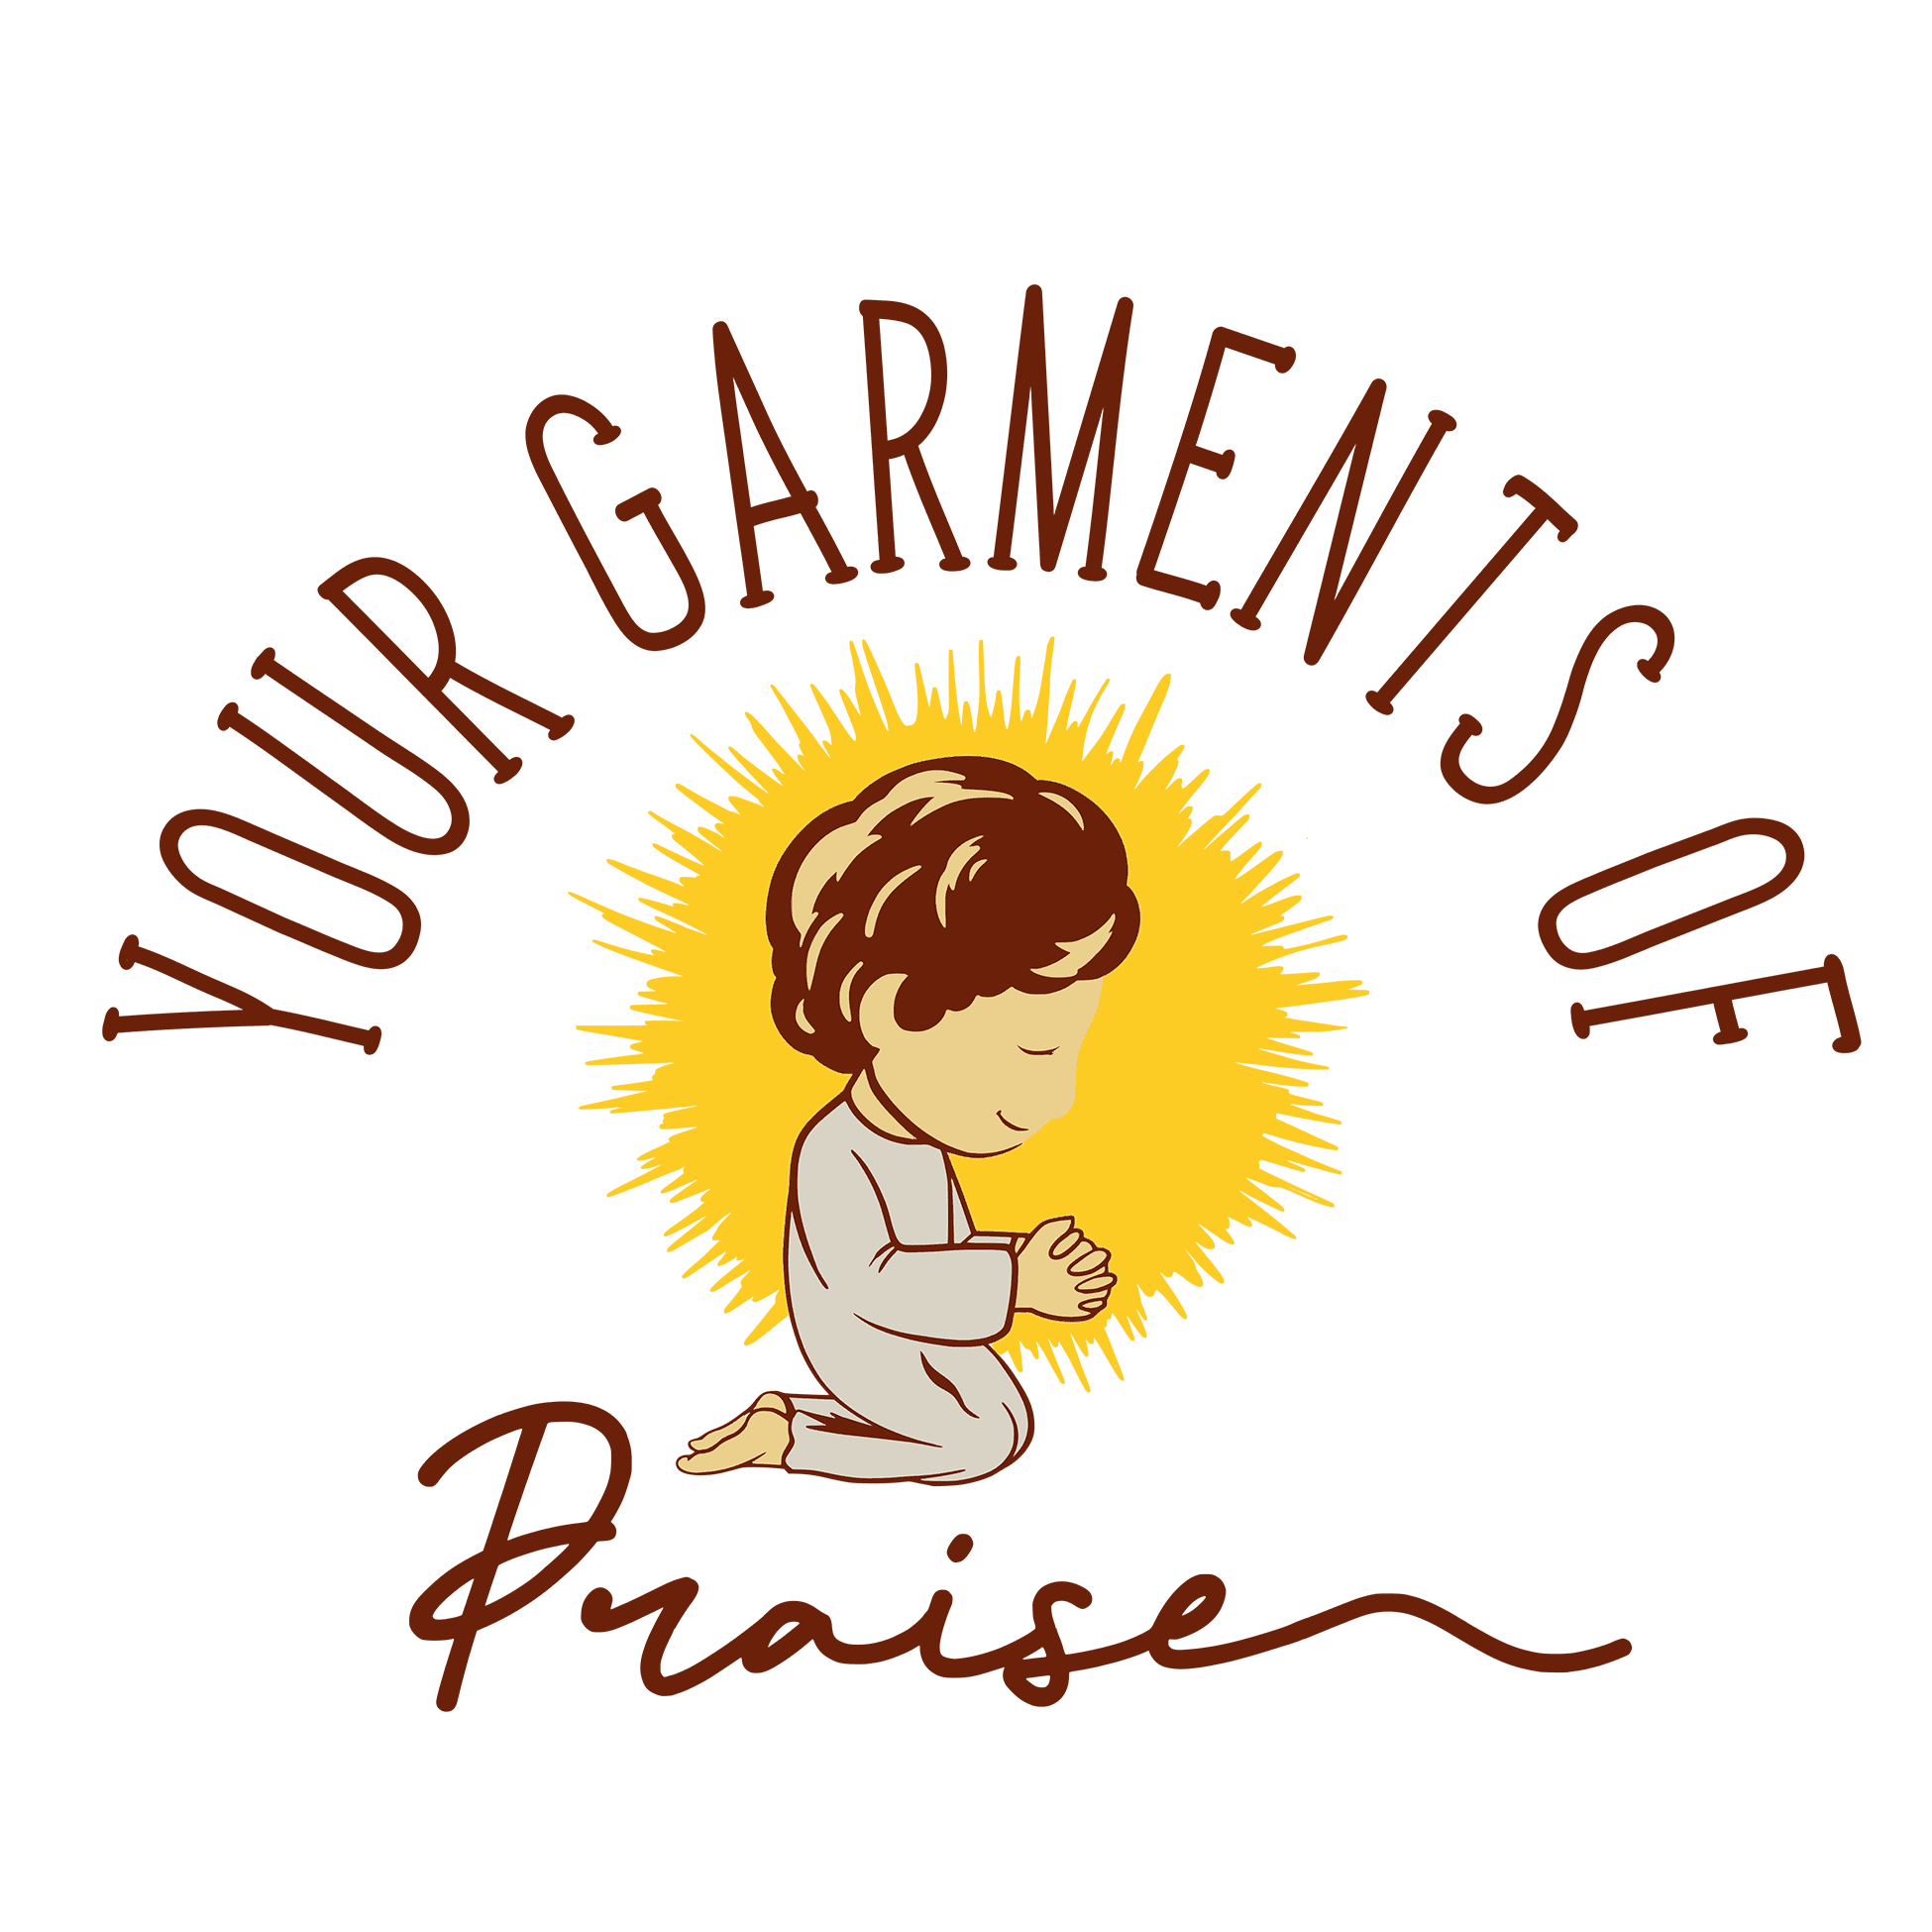 Your Garments of Praise